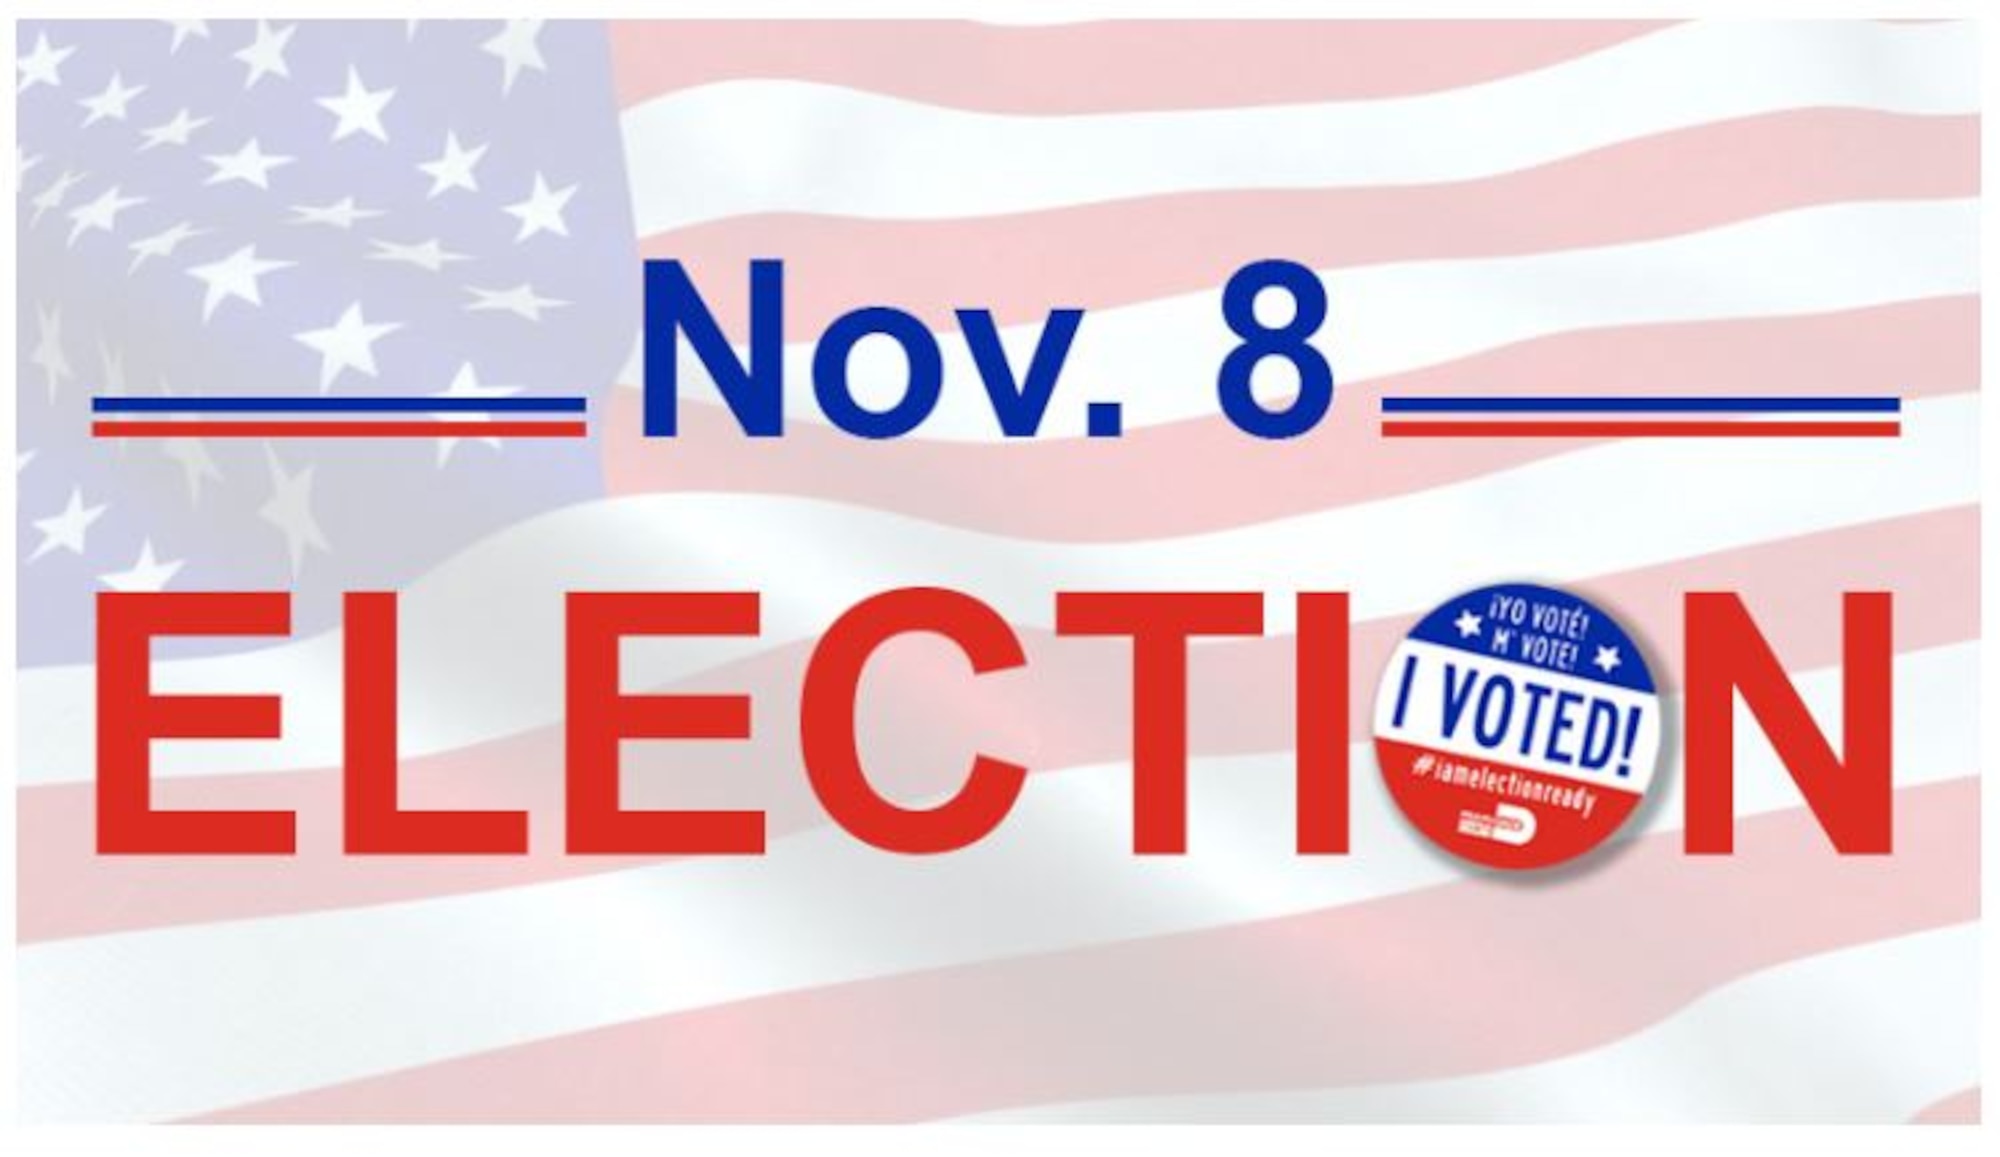 Remember that November 8 is the general election.

For detailed voter information, go to: https://www.miamidade.gov/global/news-item.page?Mduid_news=news1659552665685995